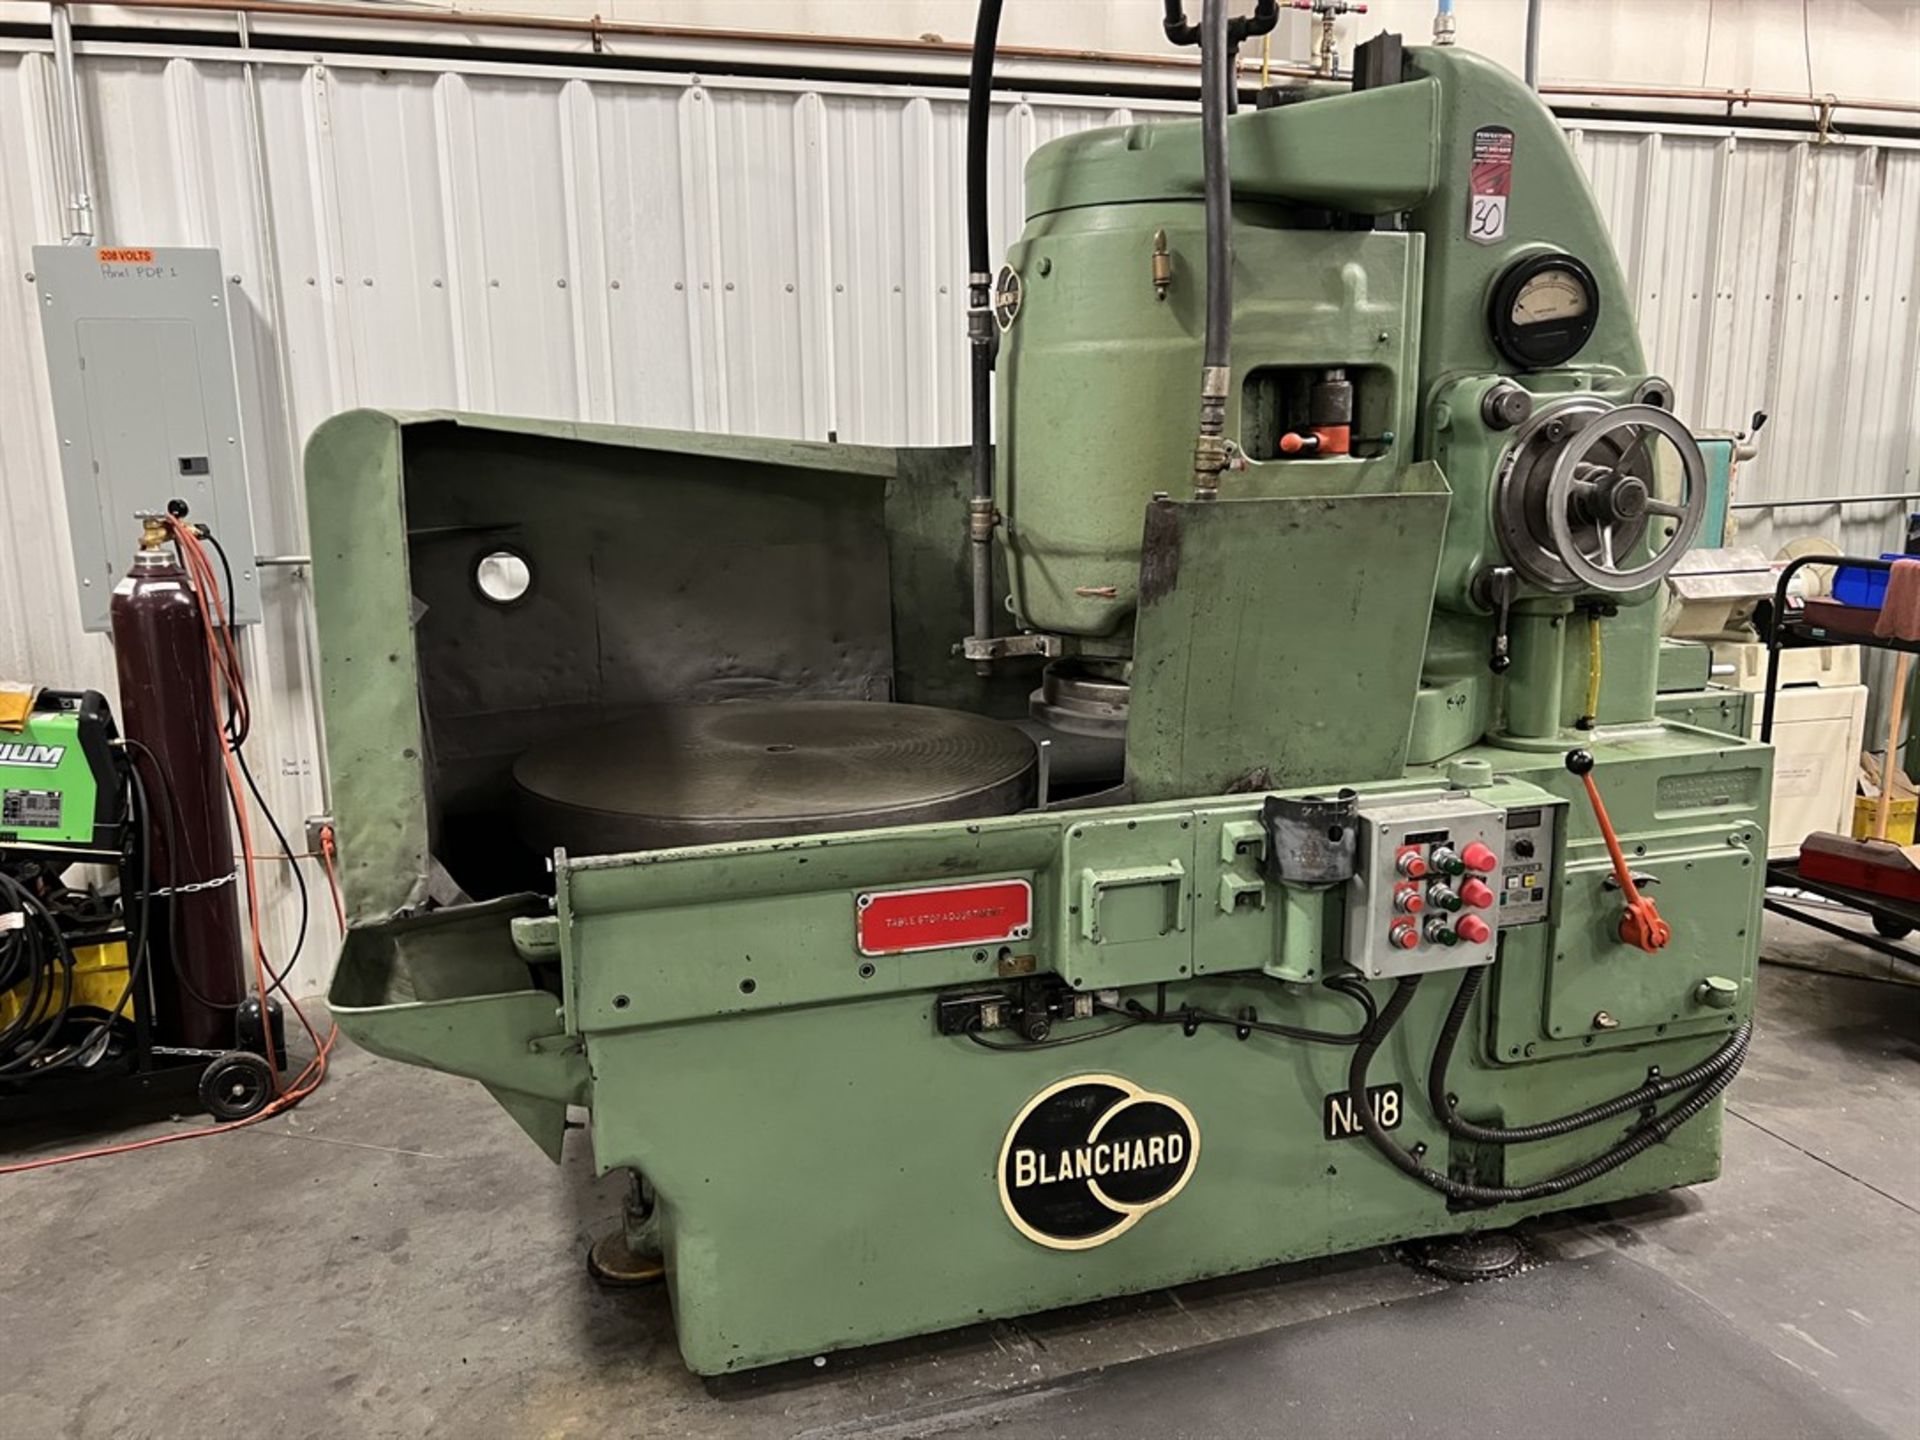 BLANCHARD No. 18 Rotary Surface Grinder, s/n 4678, 36" Dia Magnetic Chuck w/ Neutrofier, Segmented - Image 3 of 11